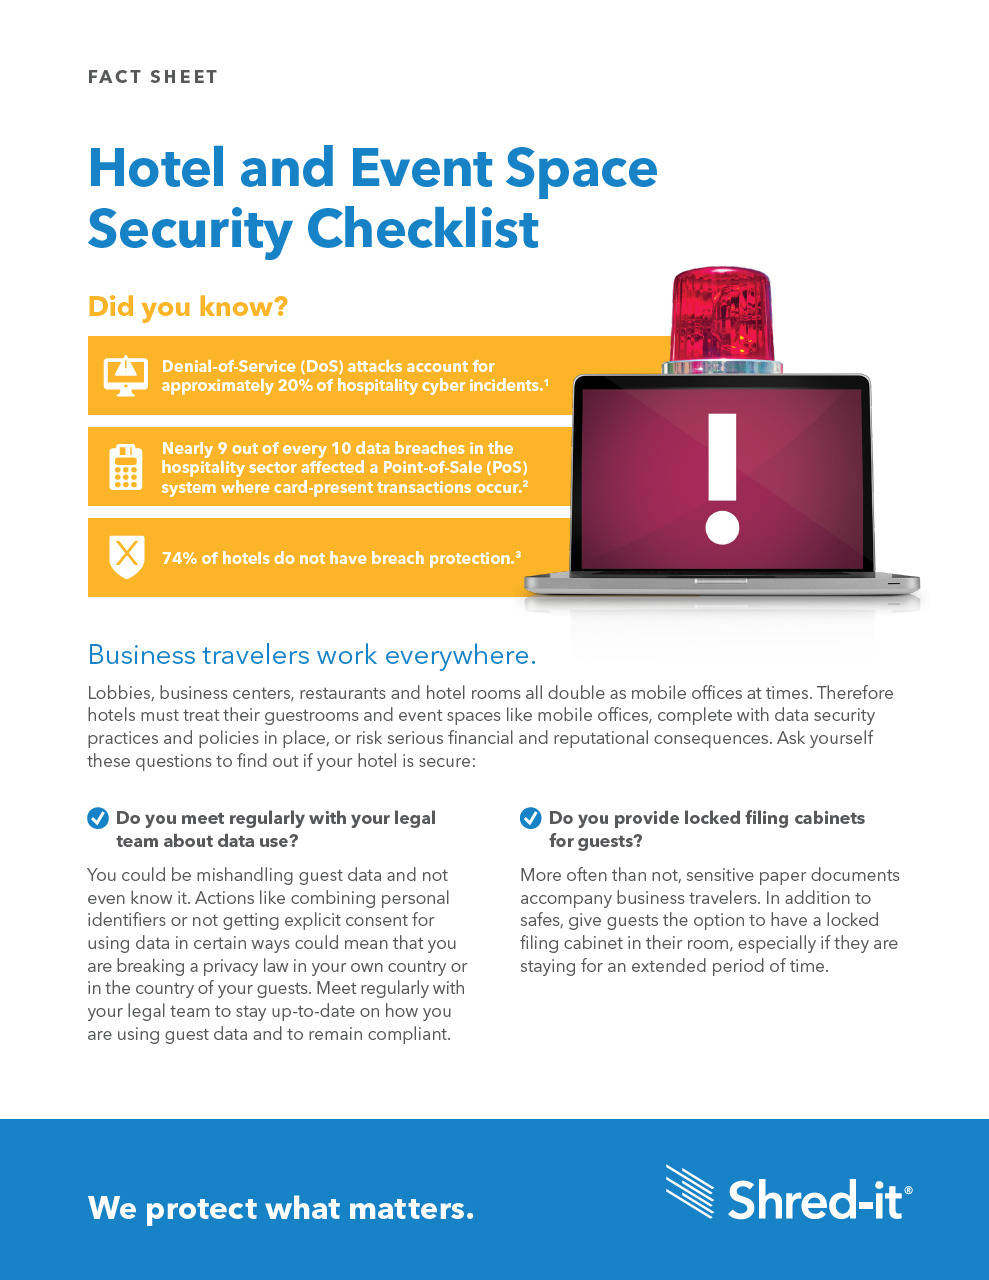 Shred-it-Hotel-Event-Space-Security-Checklist.pdf